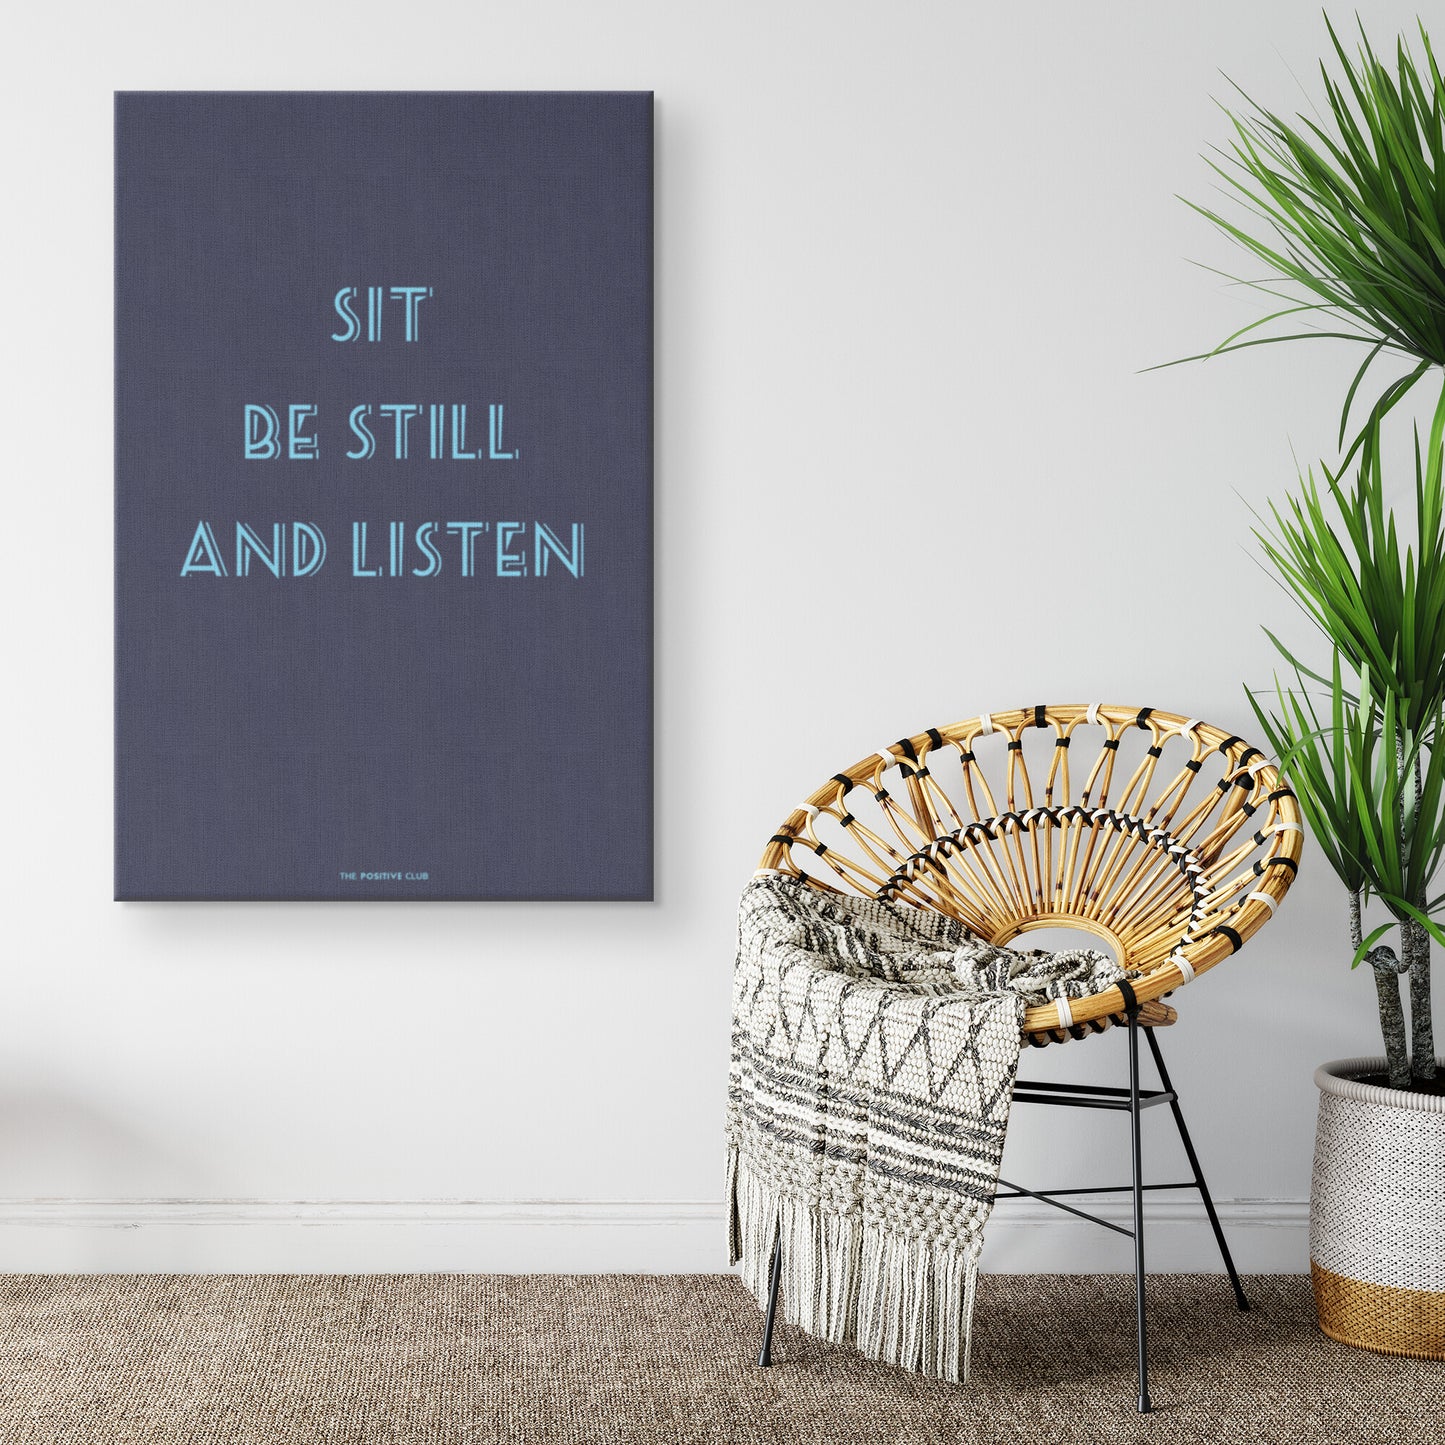 SIT BE STILL AND LISTEN